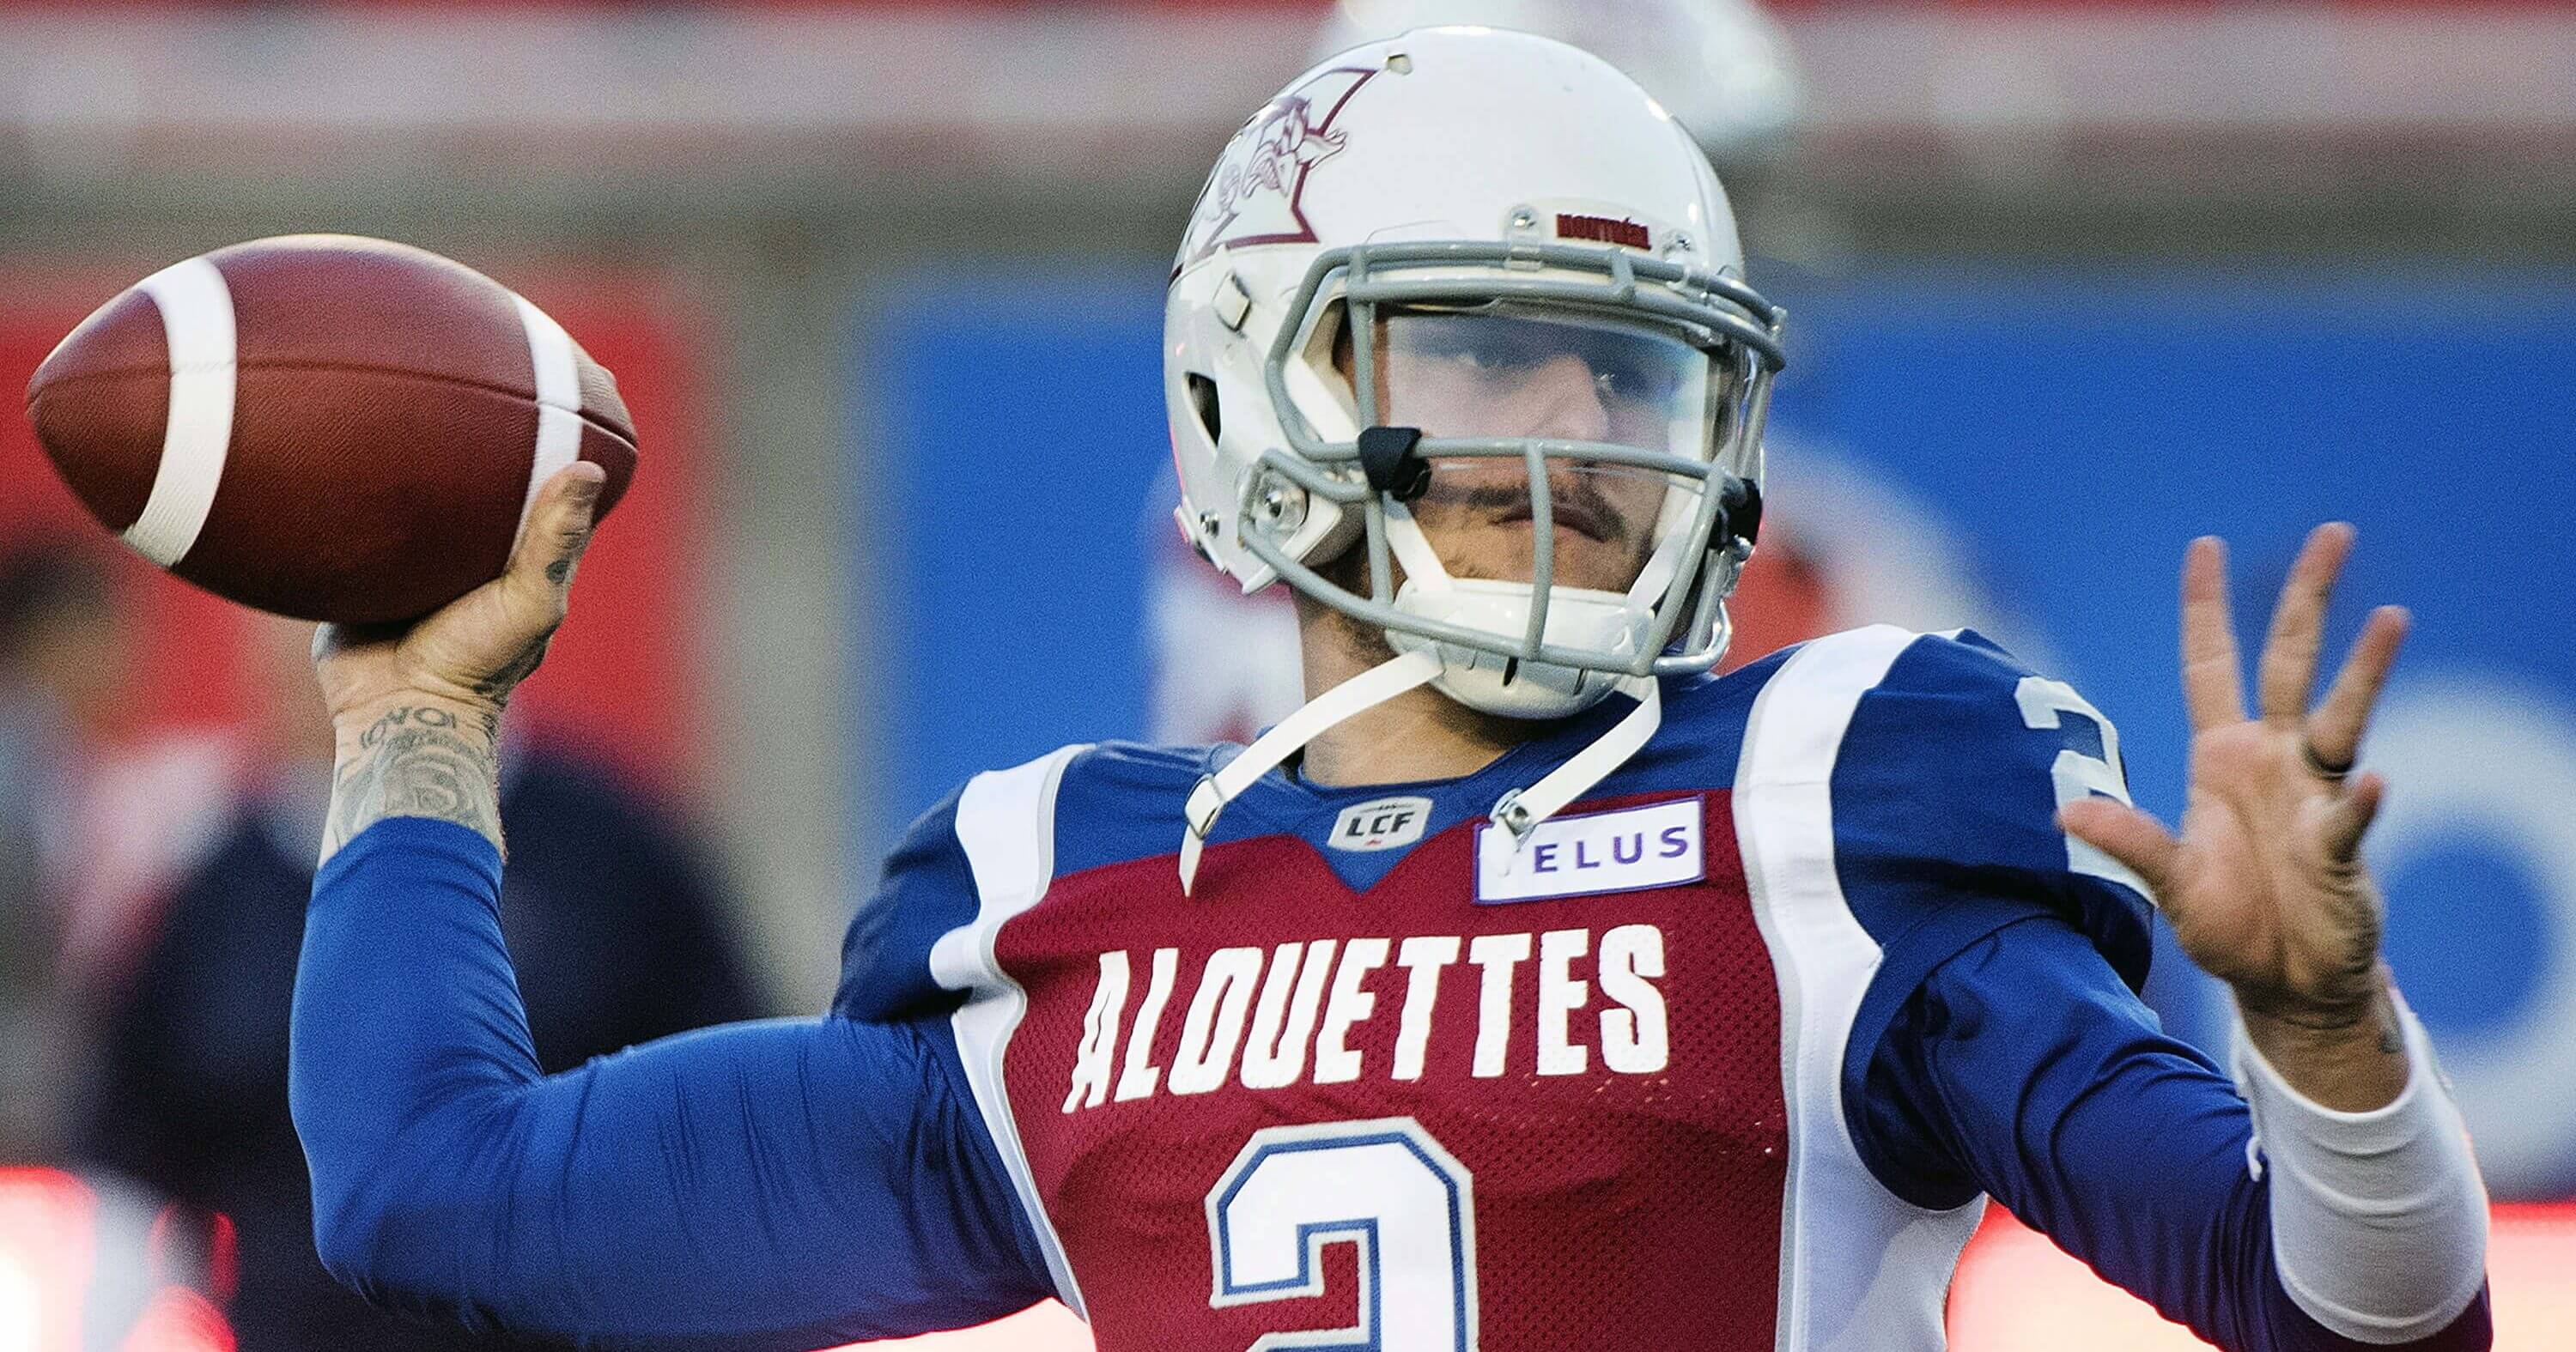 Quarterback Johnny Manziel throws a pass during warmups before the Montreal Alouettes' game against the BC Lions in Montreal on Sept. 14, 2018.